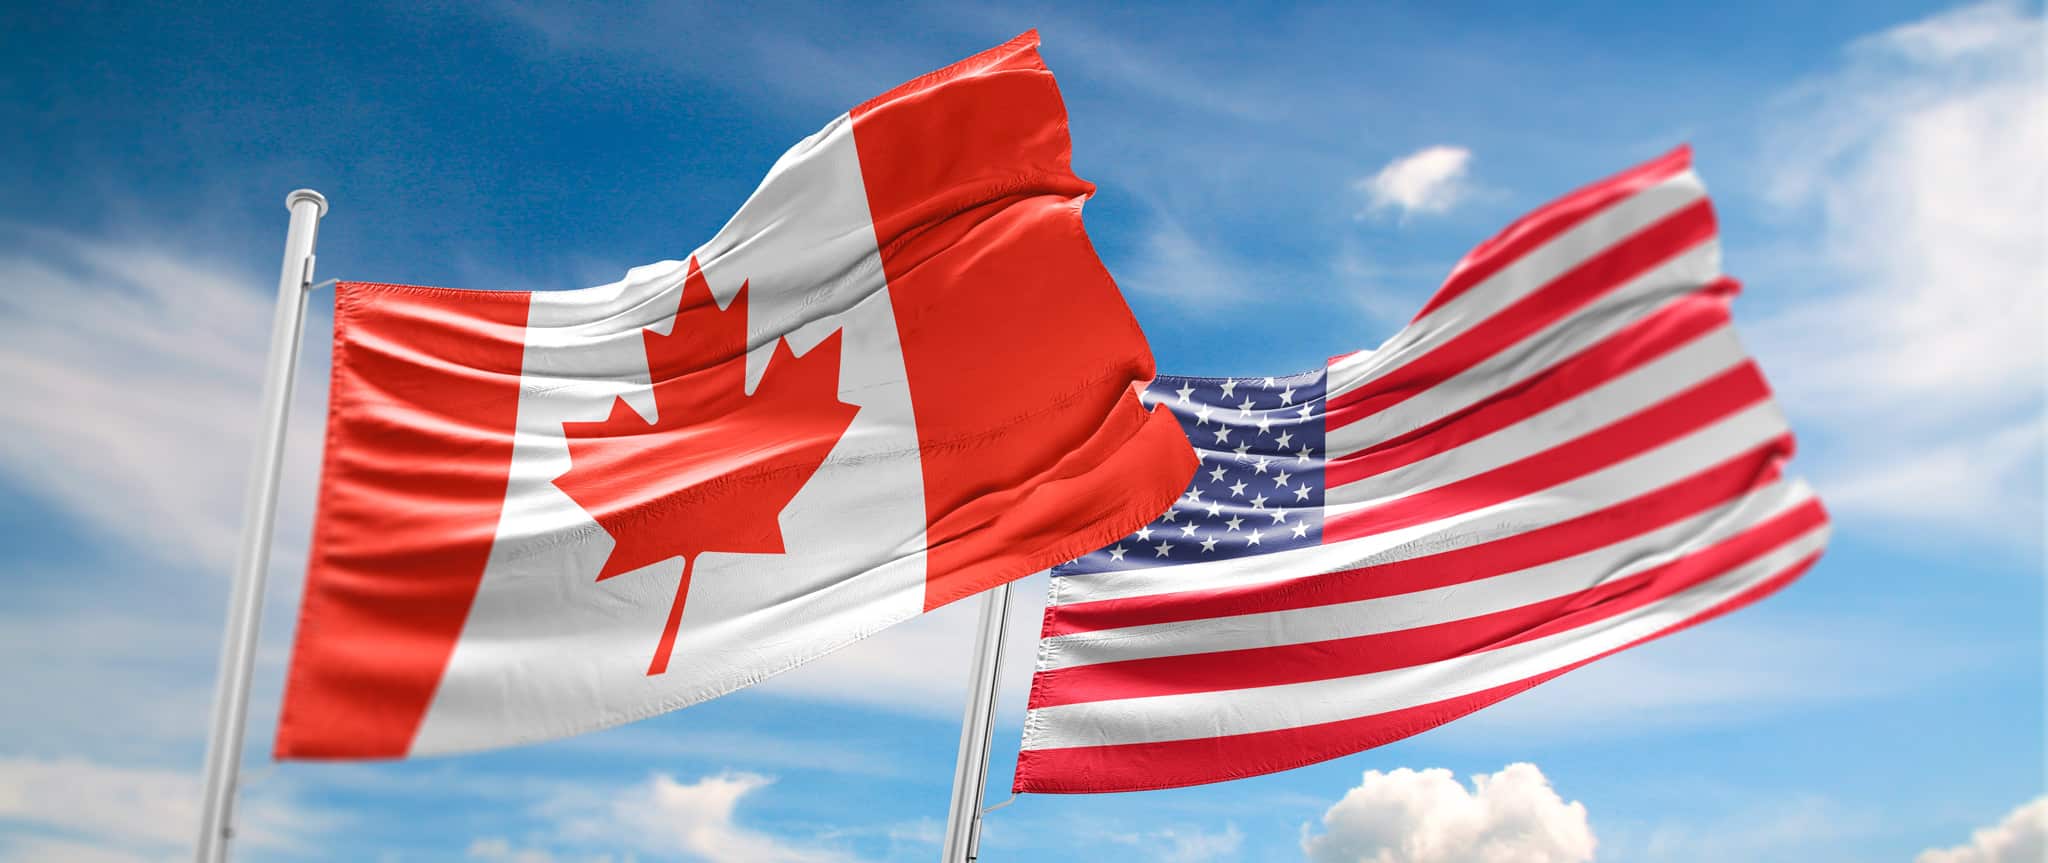 Flags of Canada and the United States in front of a blue sky with clouds.